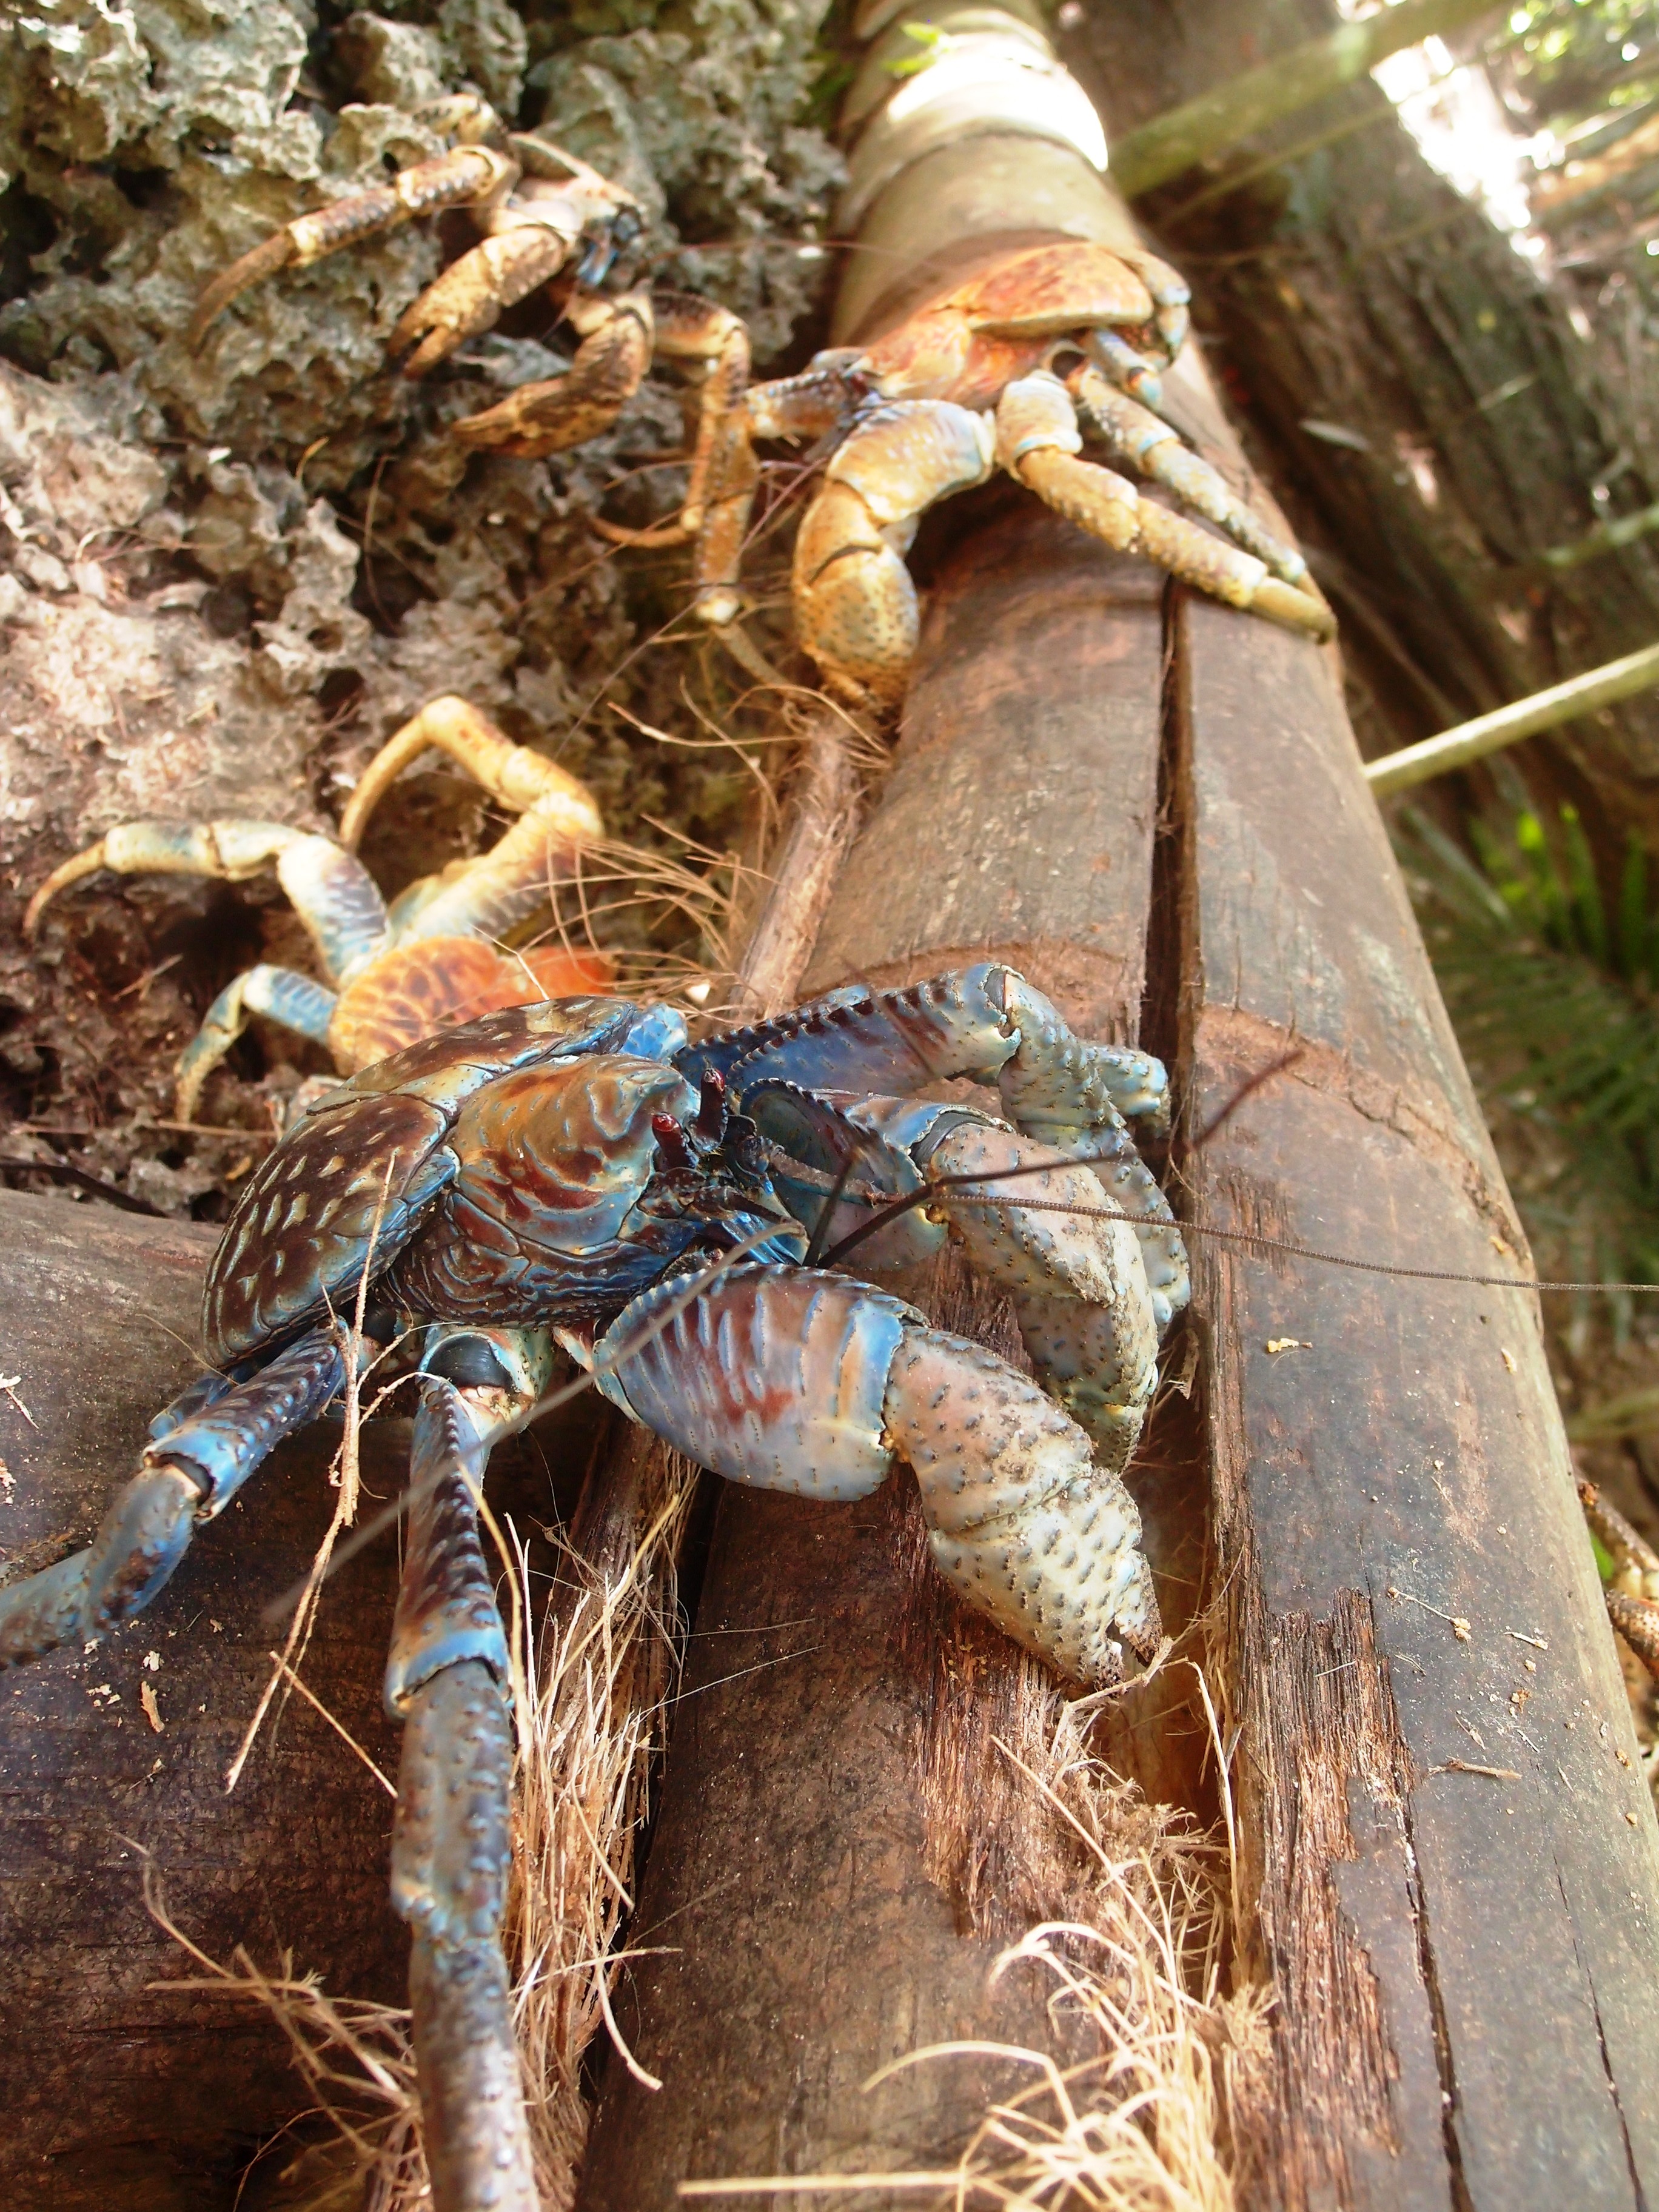 Coconut crabs caught in action.